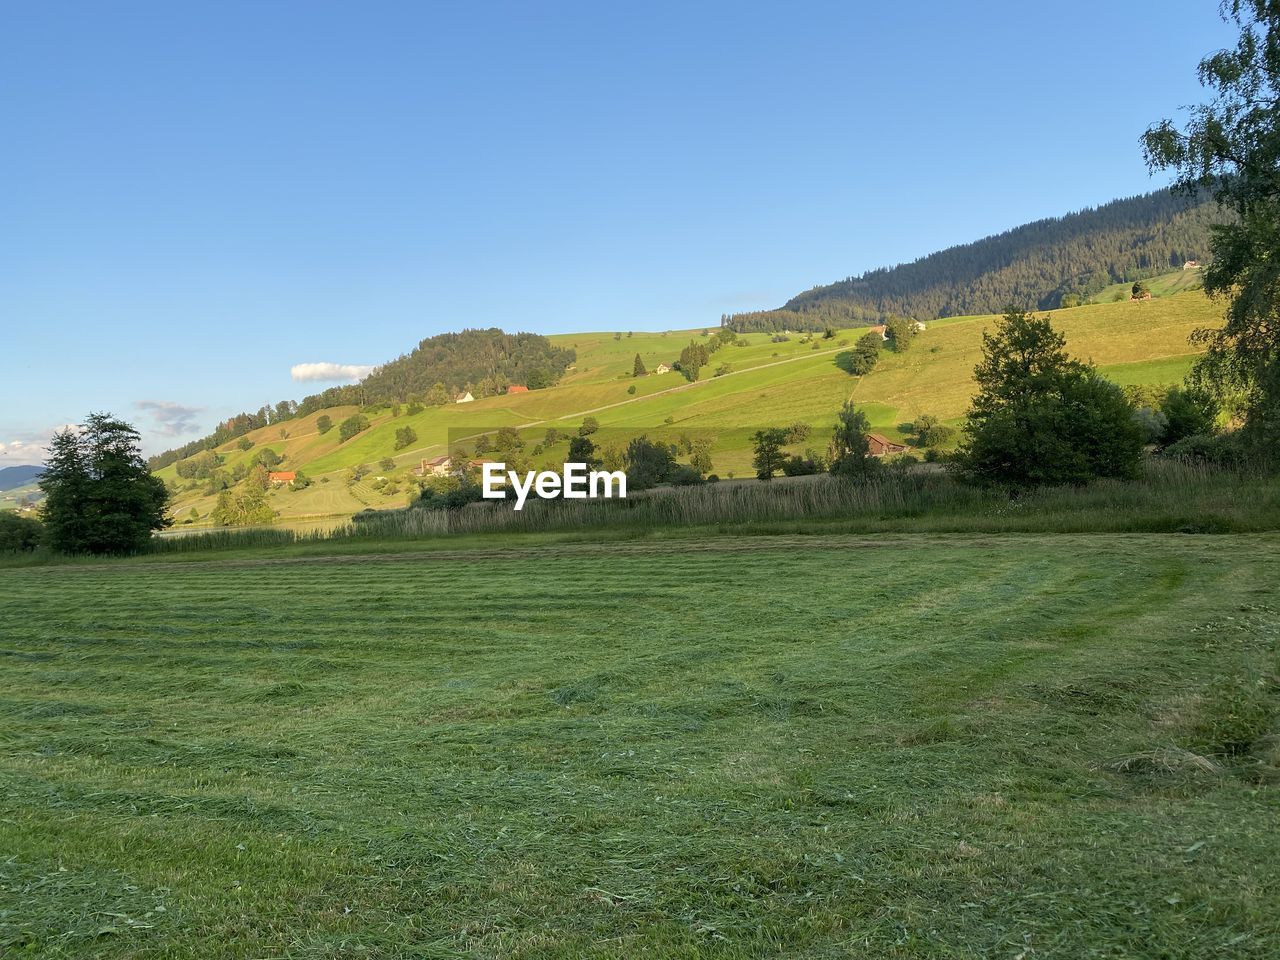 SCENIC VIEW OF GRASSY FIELD AGAINST CLEAR SKY